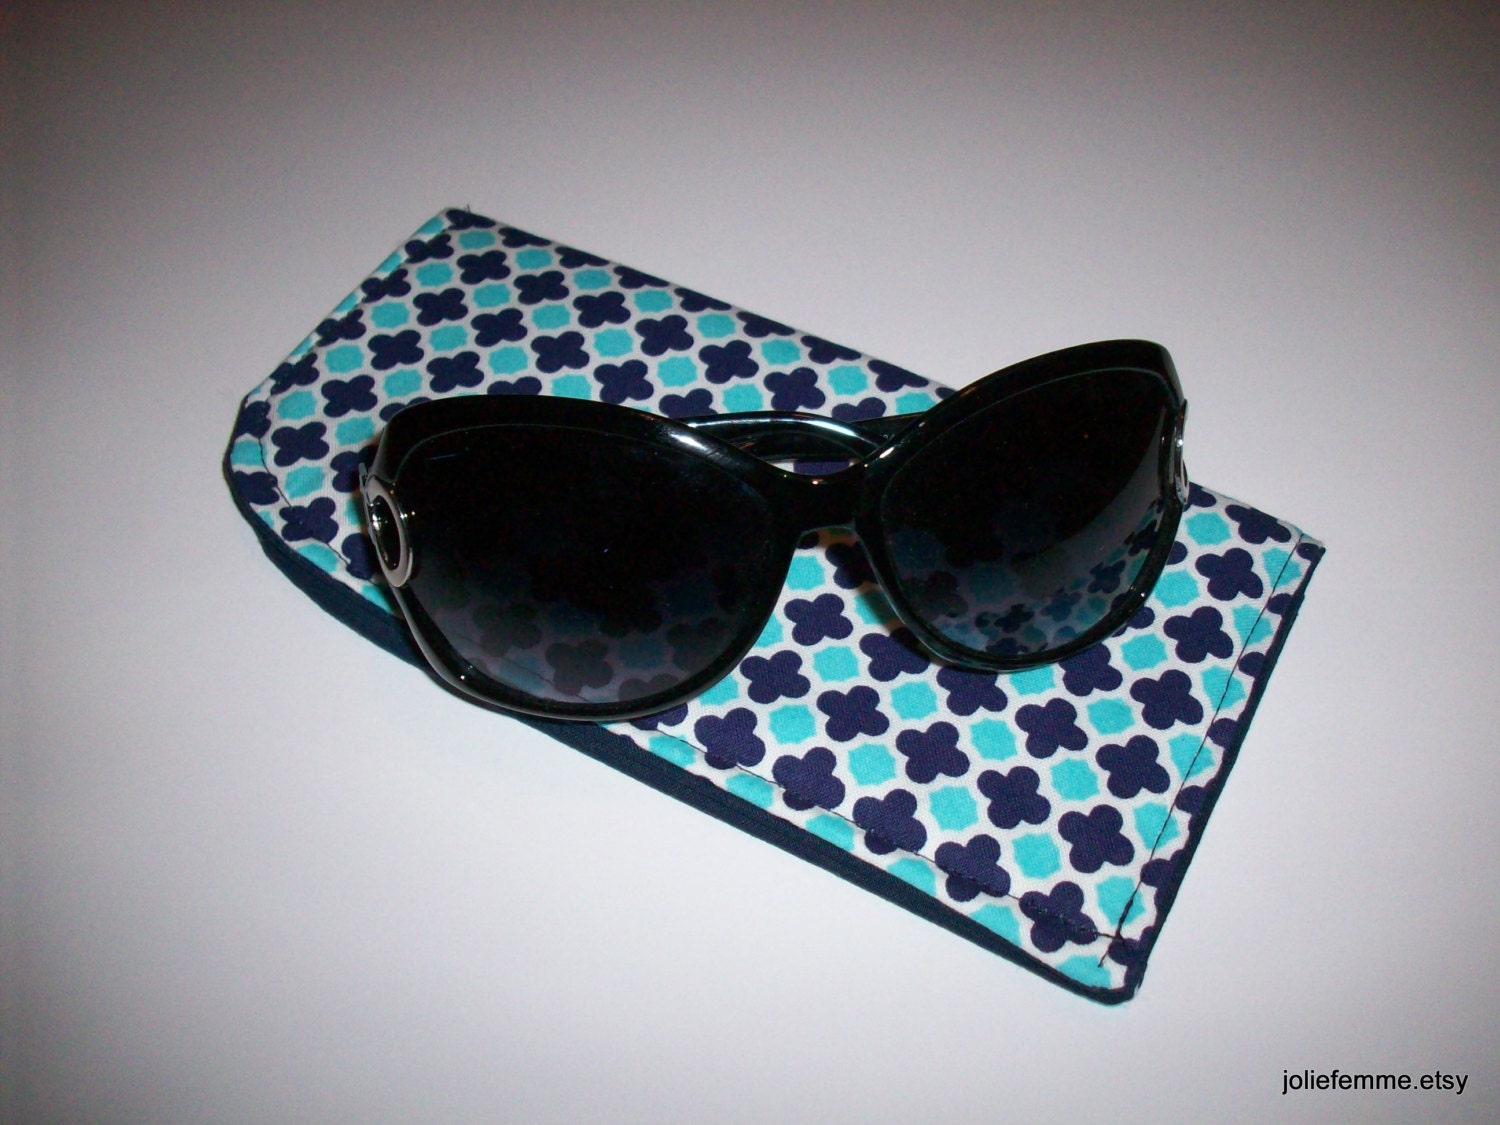 Cobalt Blue Morrocan Tiles Eyeglass or Sunglass Case Protective Padded Pouch Choose your Size - joliefemme